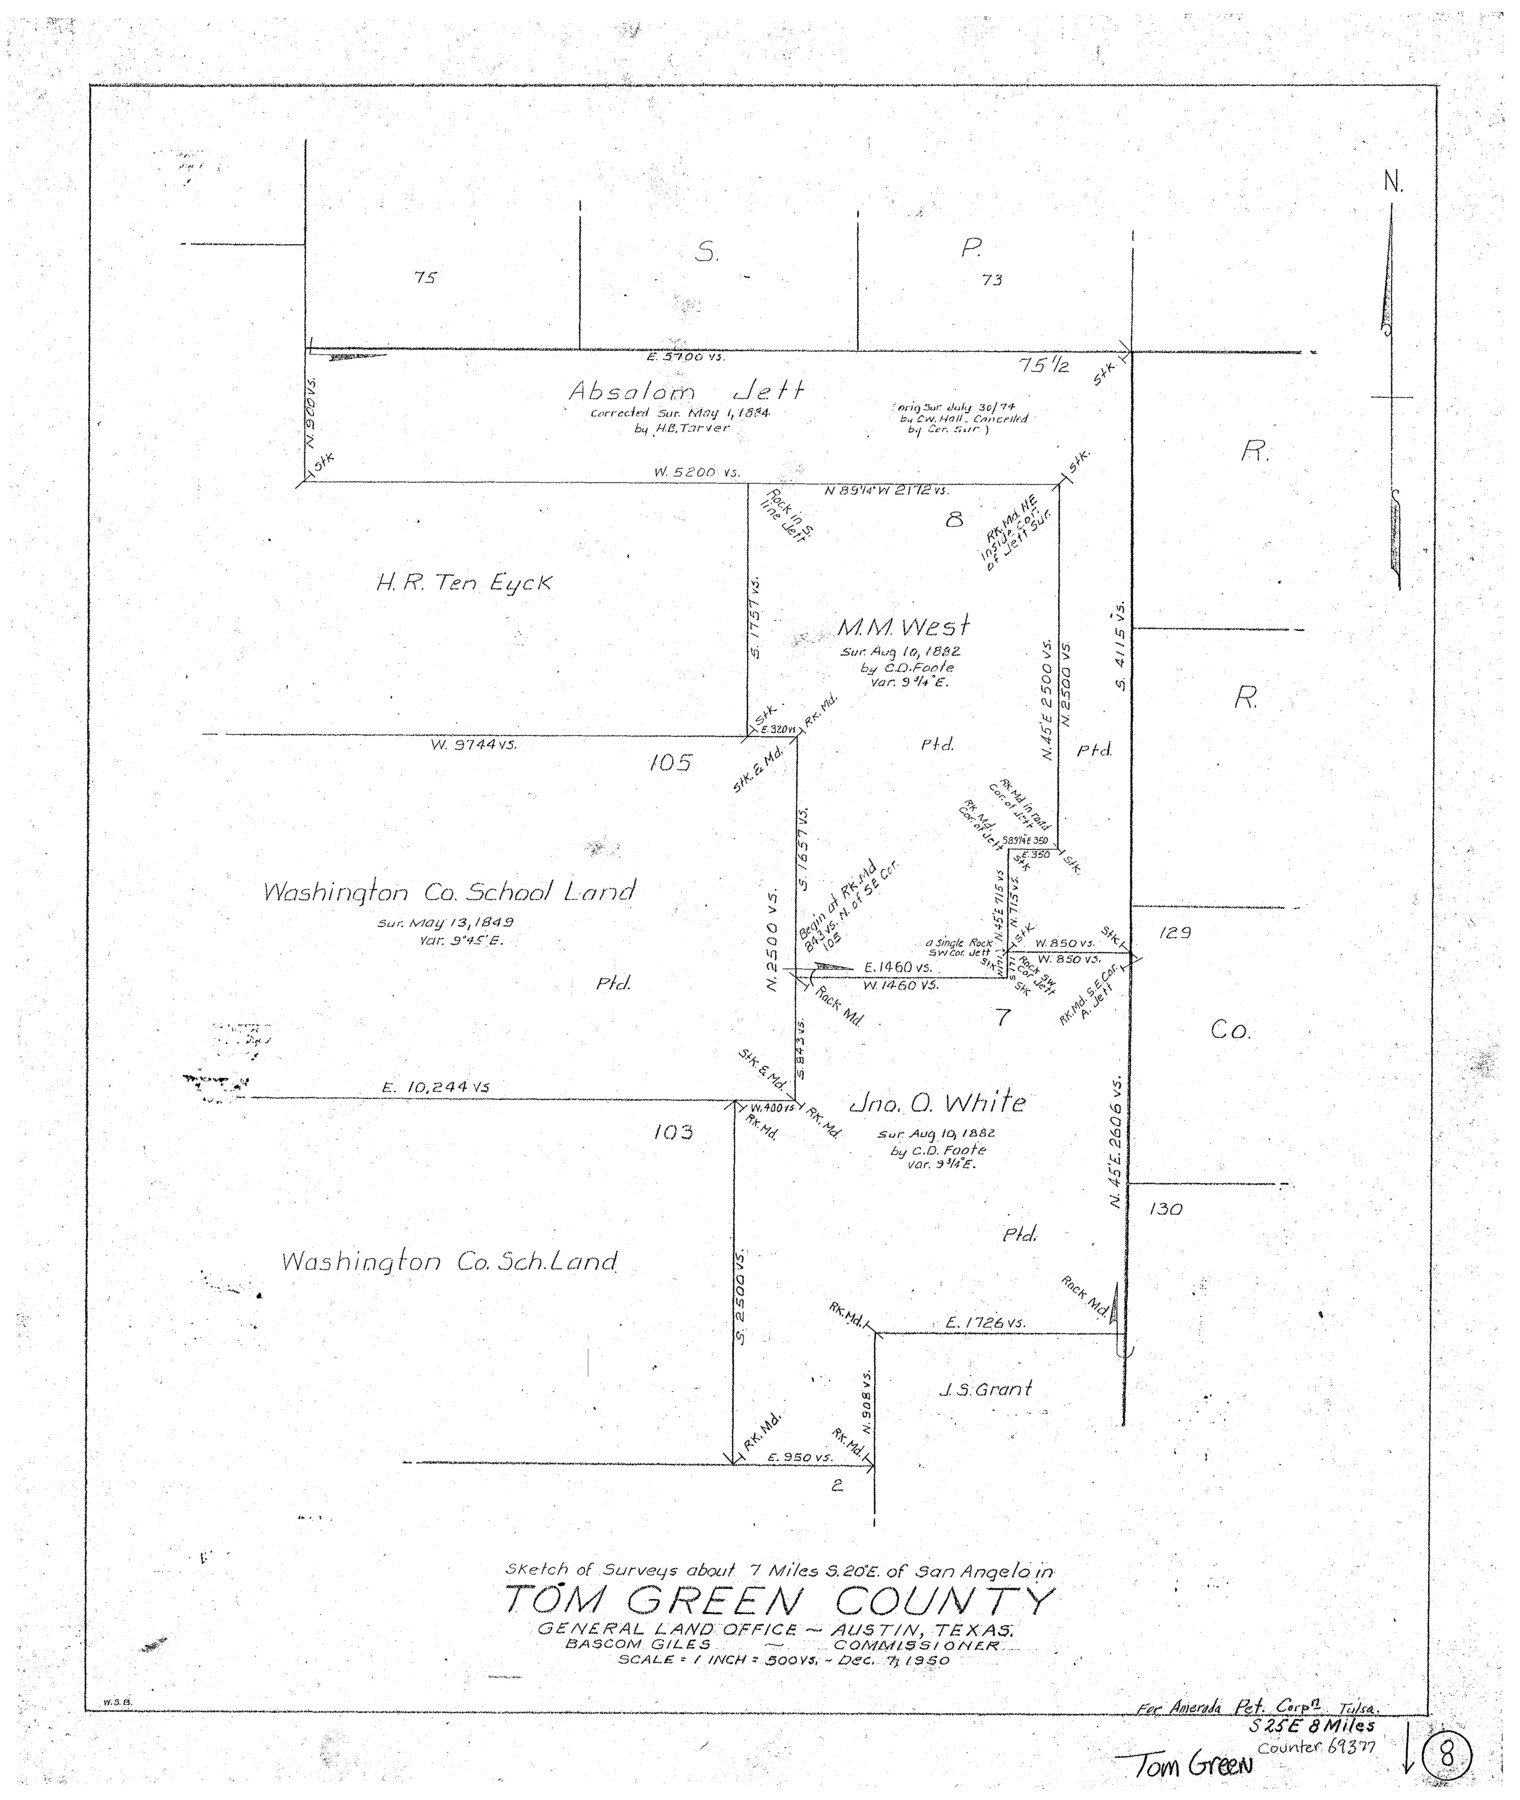 69377, Tom Green County Working Sketch 8, General Map Collection